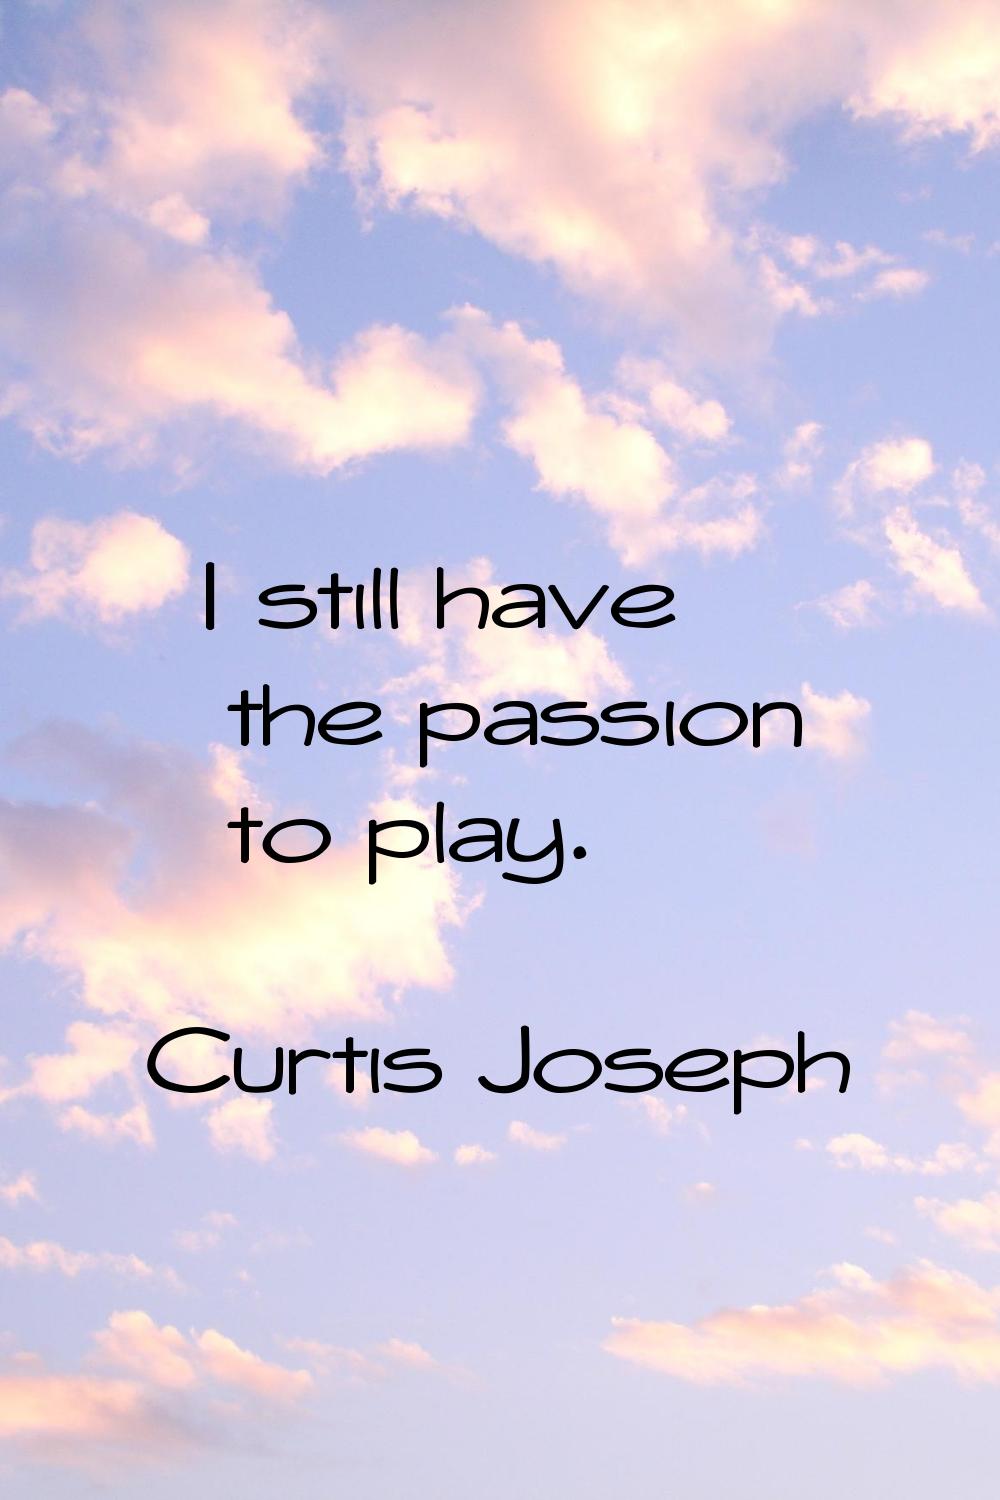 I still have the passion to play.